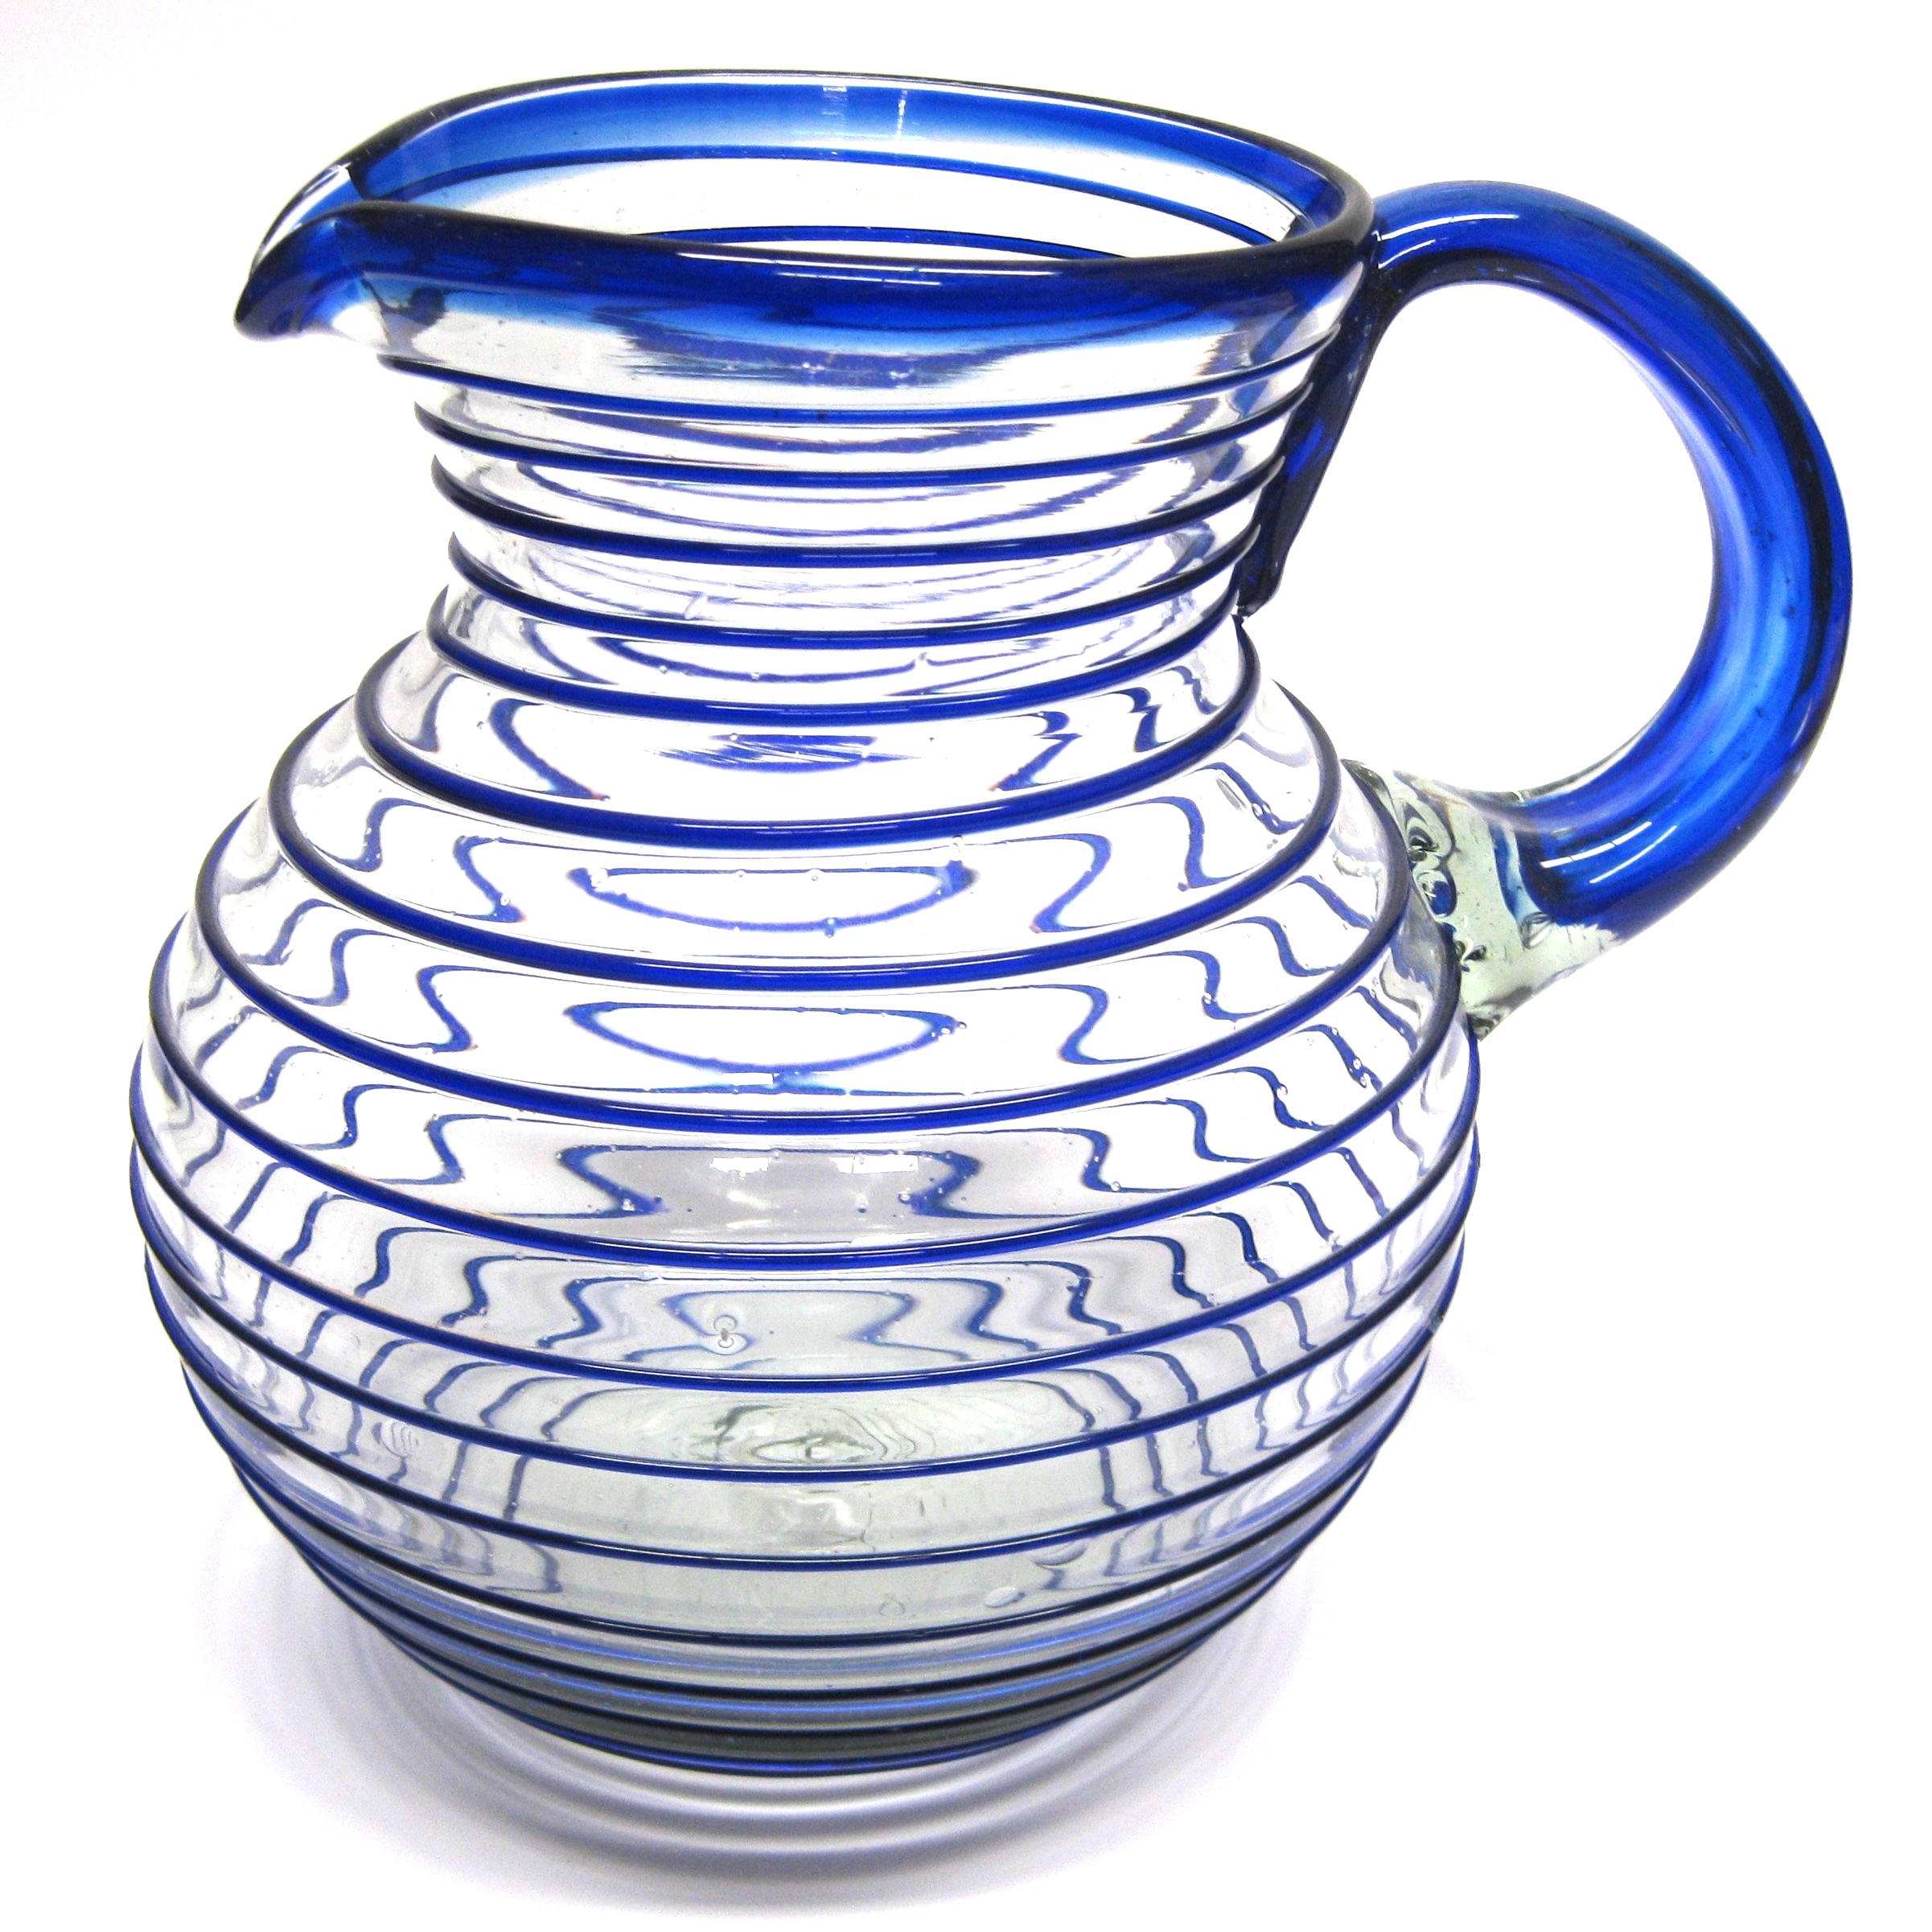 Sale Items / Cobalt Blue Spiral 120 oz Large Bola Pitcher / A classic with a modern twist, this pitcher is adorned with a beautiful cobalt blue spiral.